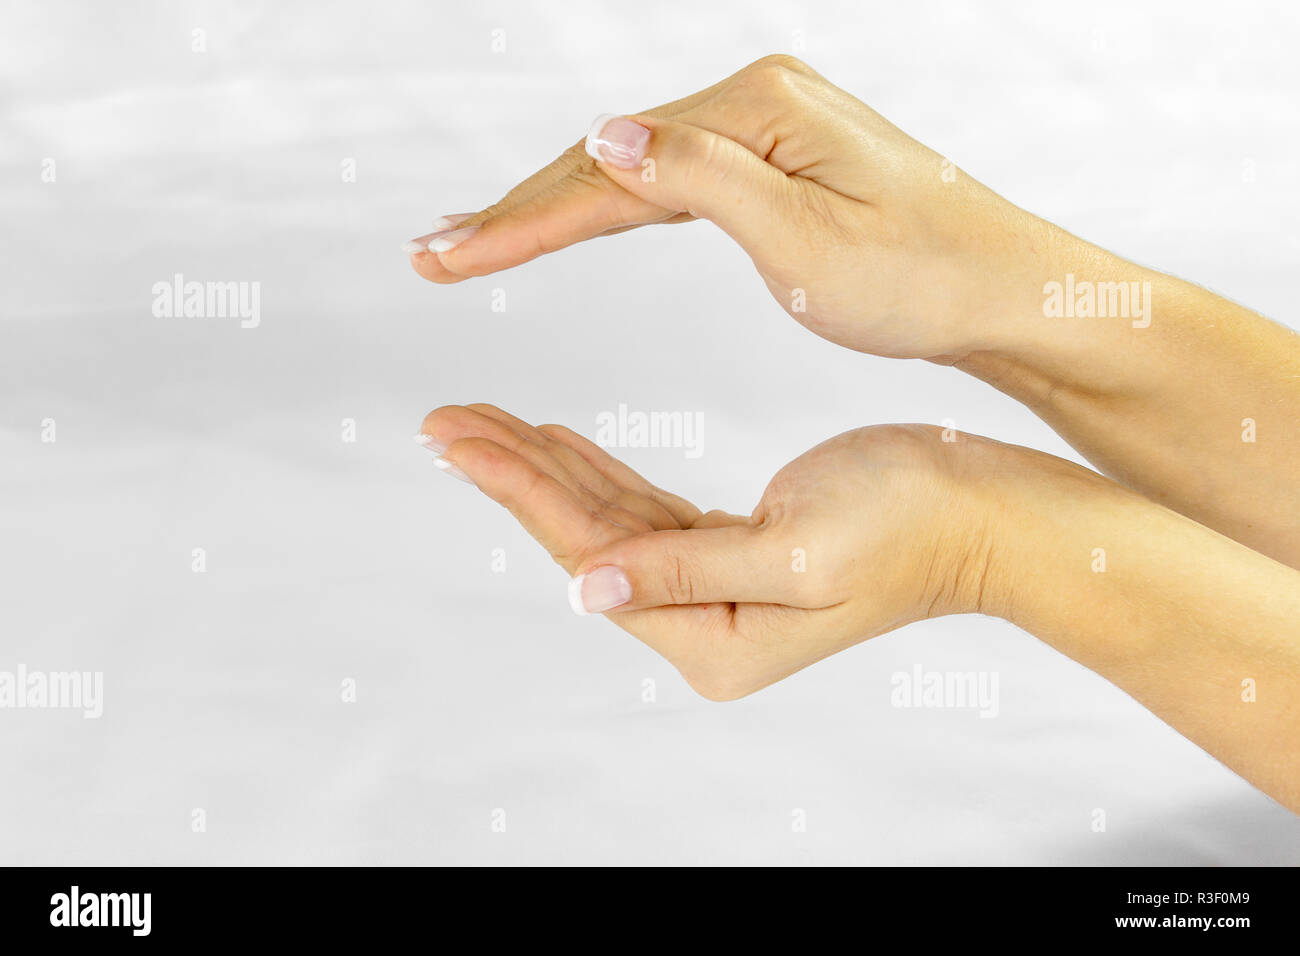 two young female hands hovering above the other and seem to include anything. Stock Photo